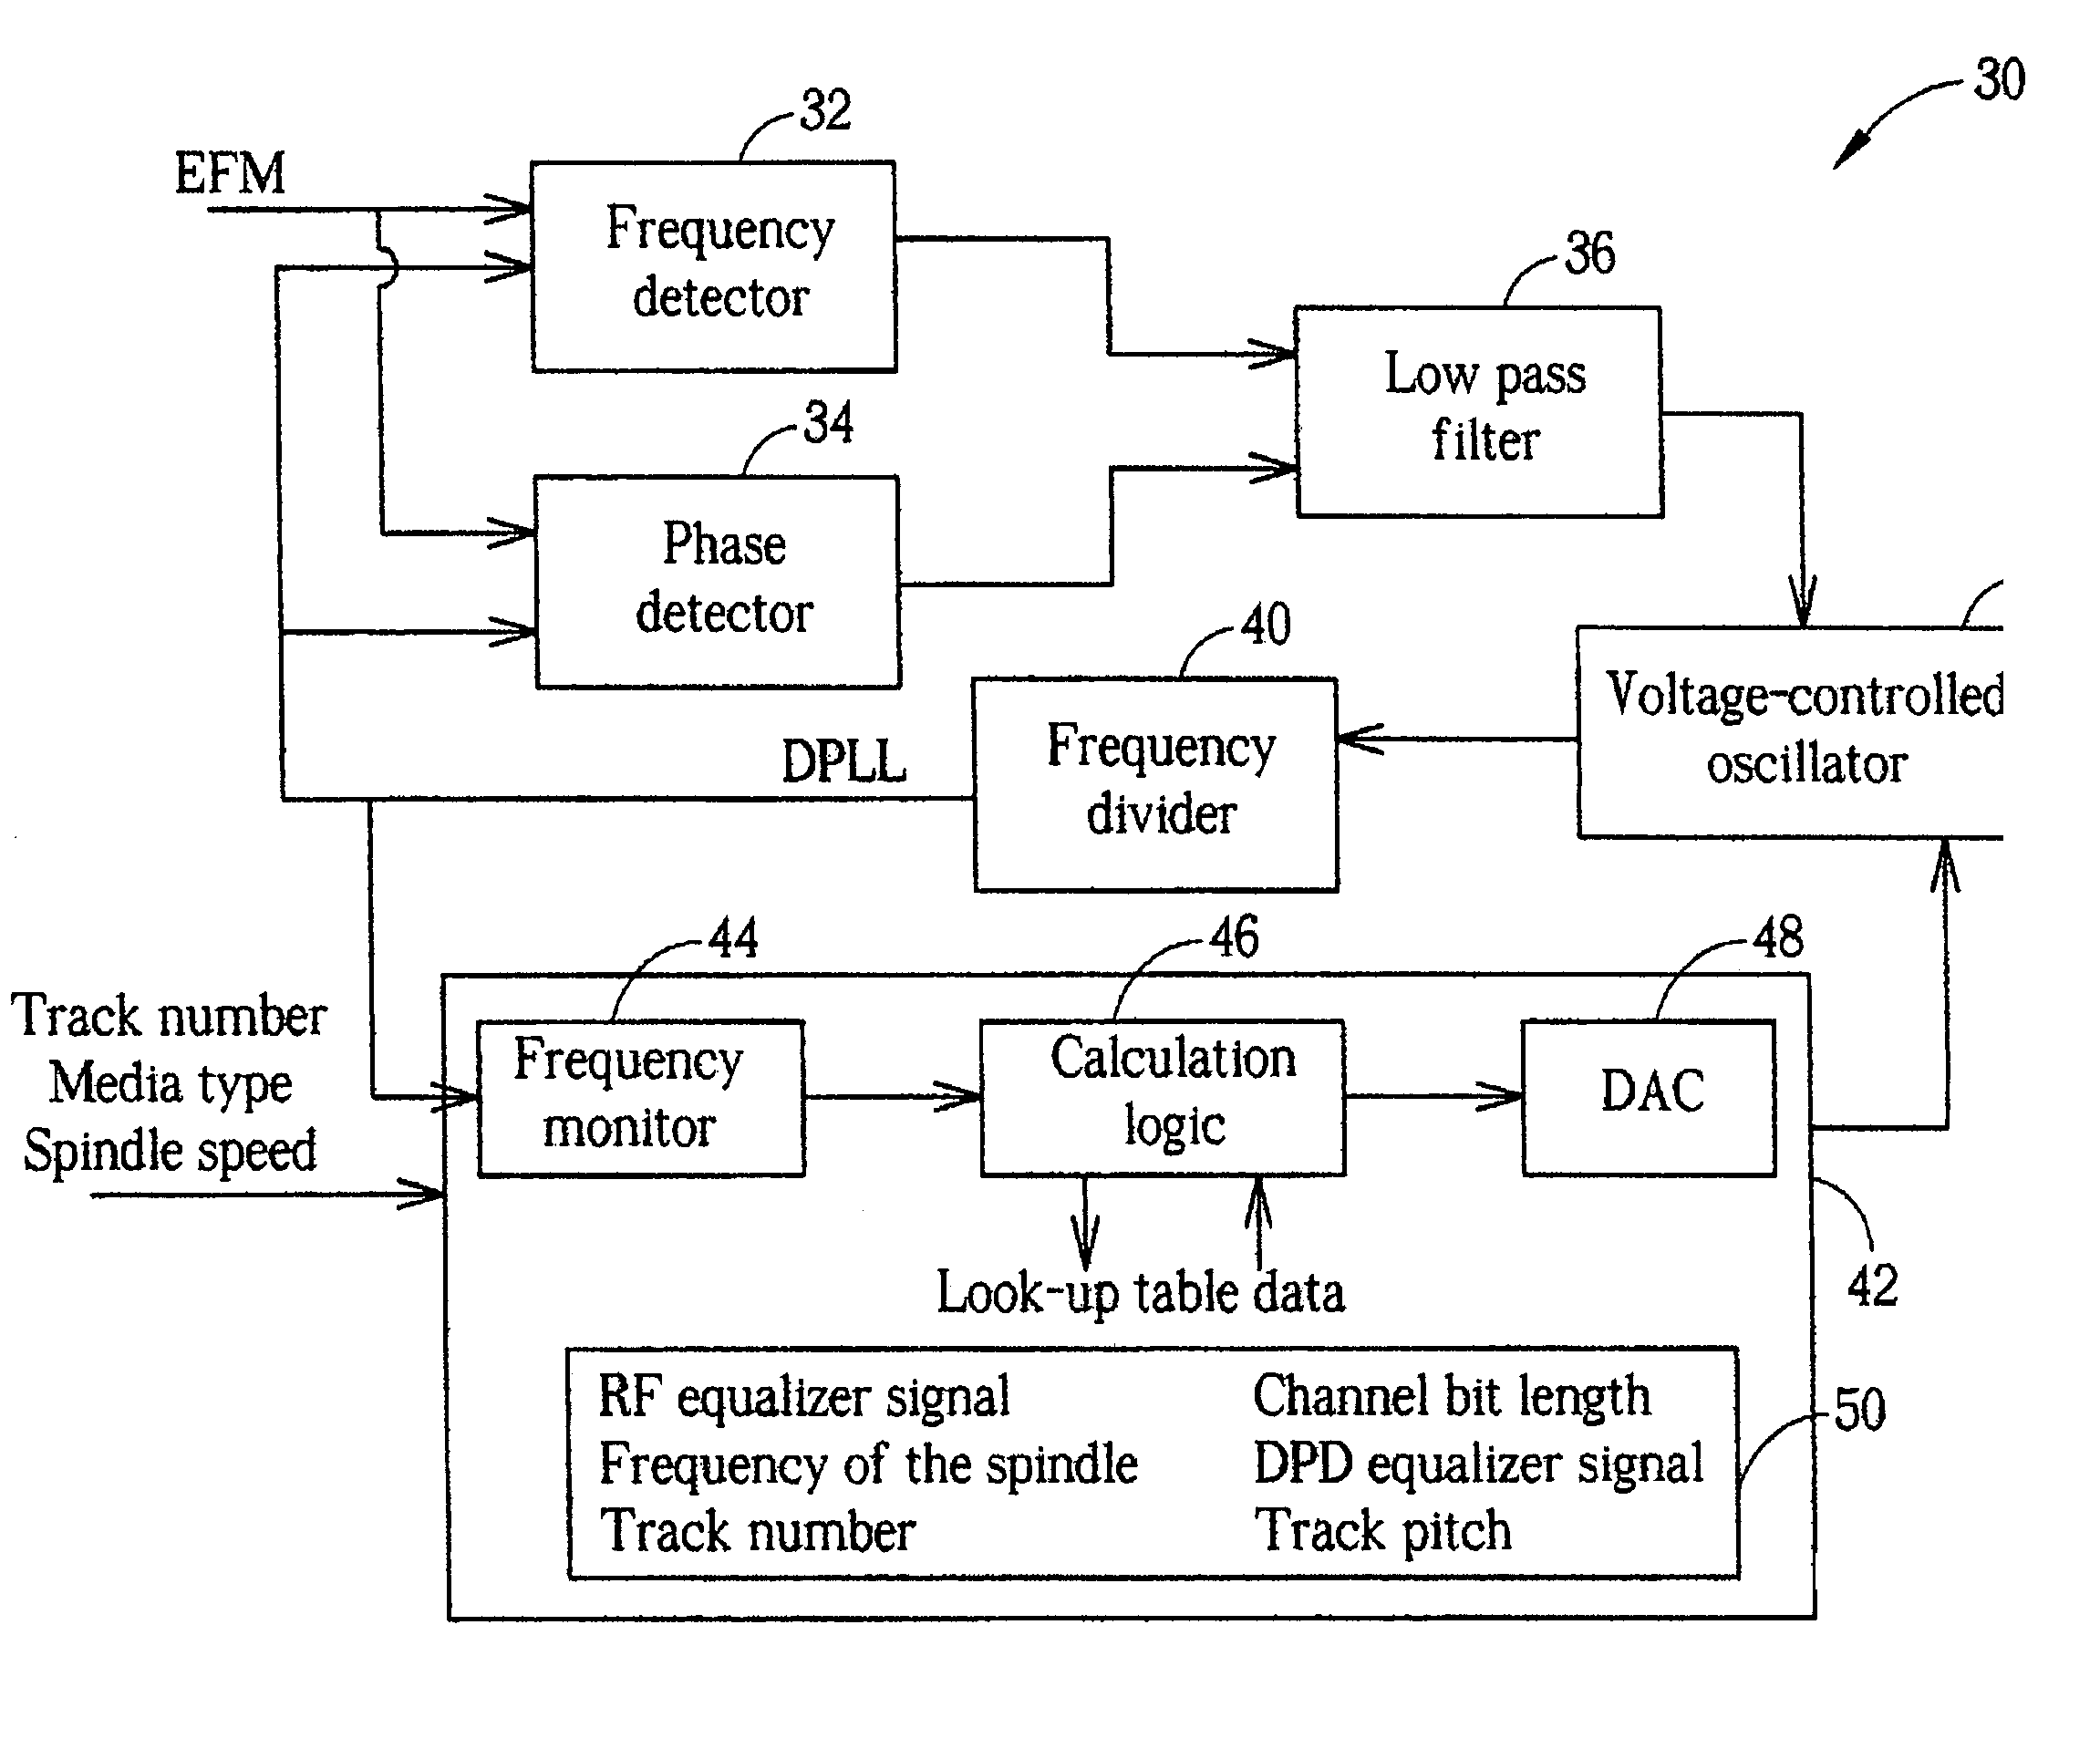 Method of controlling an optical disk drive by calculating a target frequency of a DPLL signal